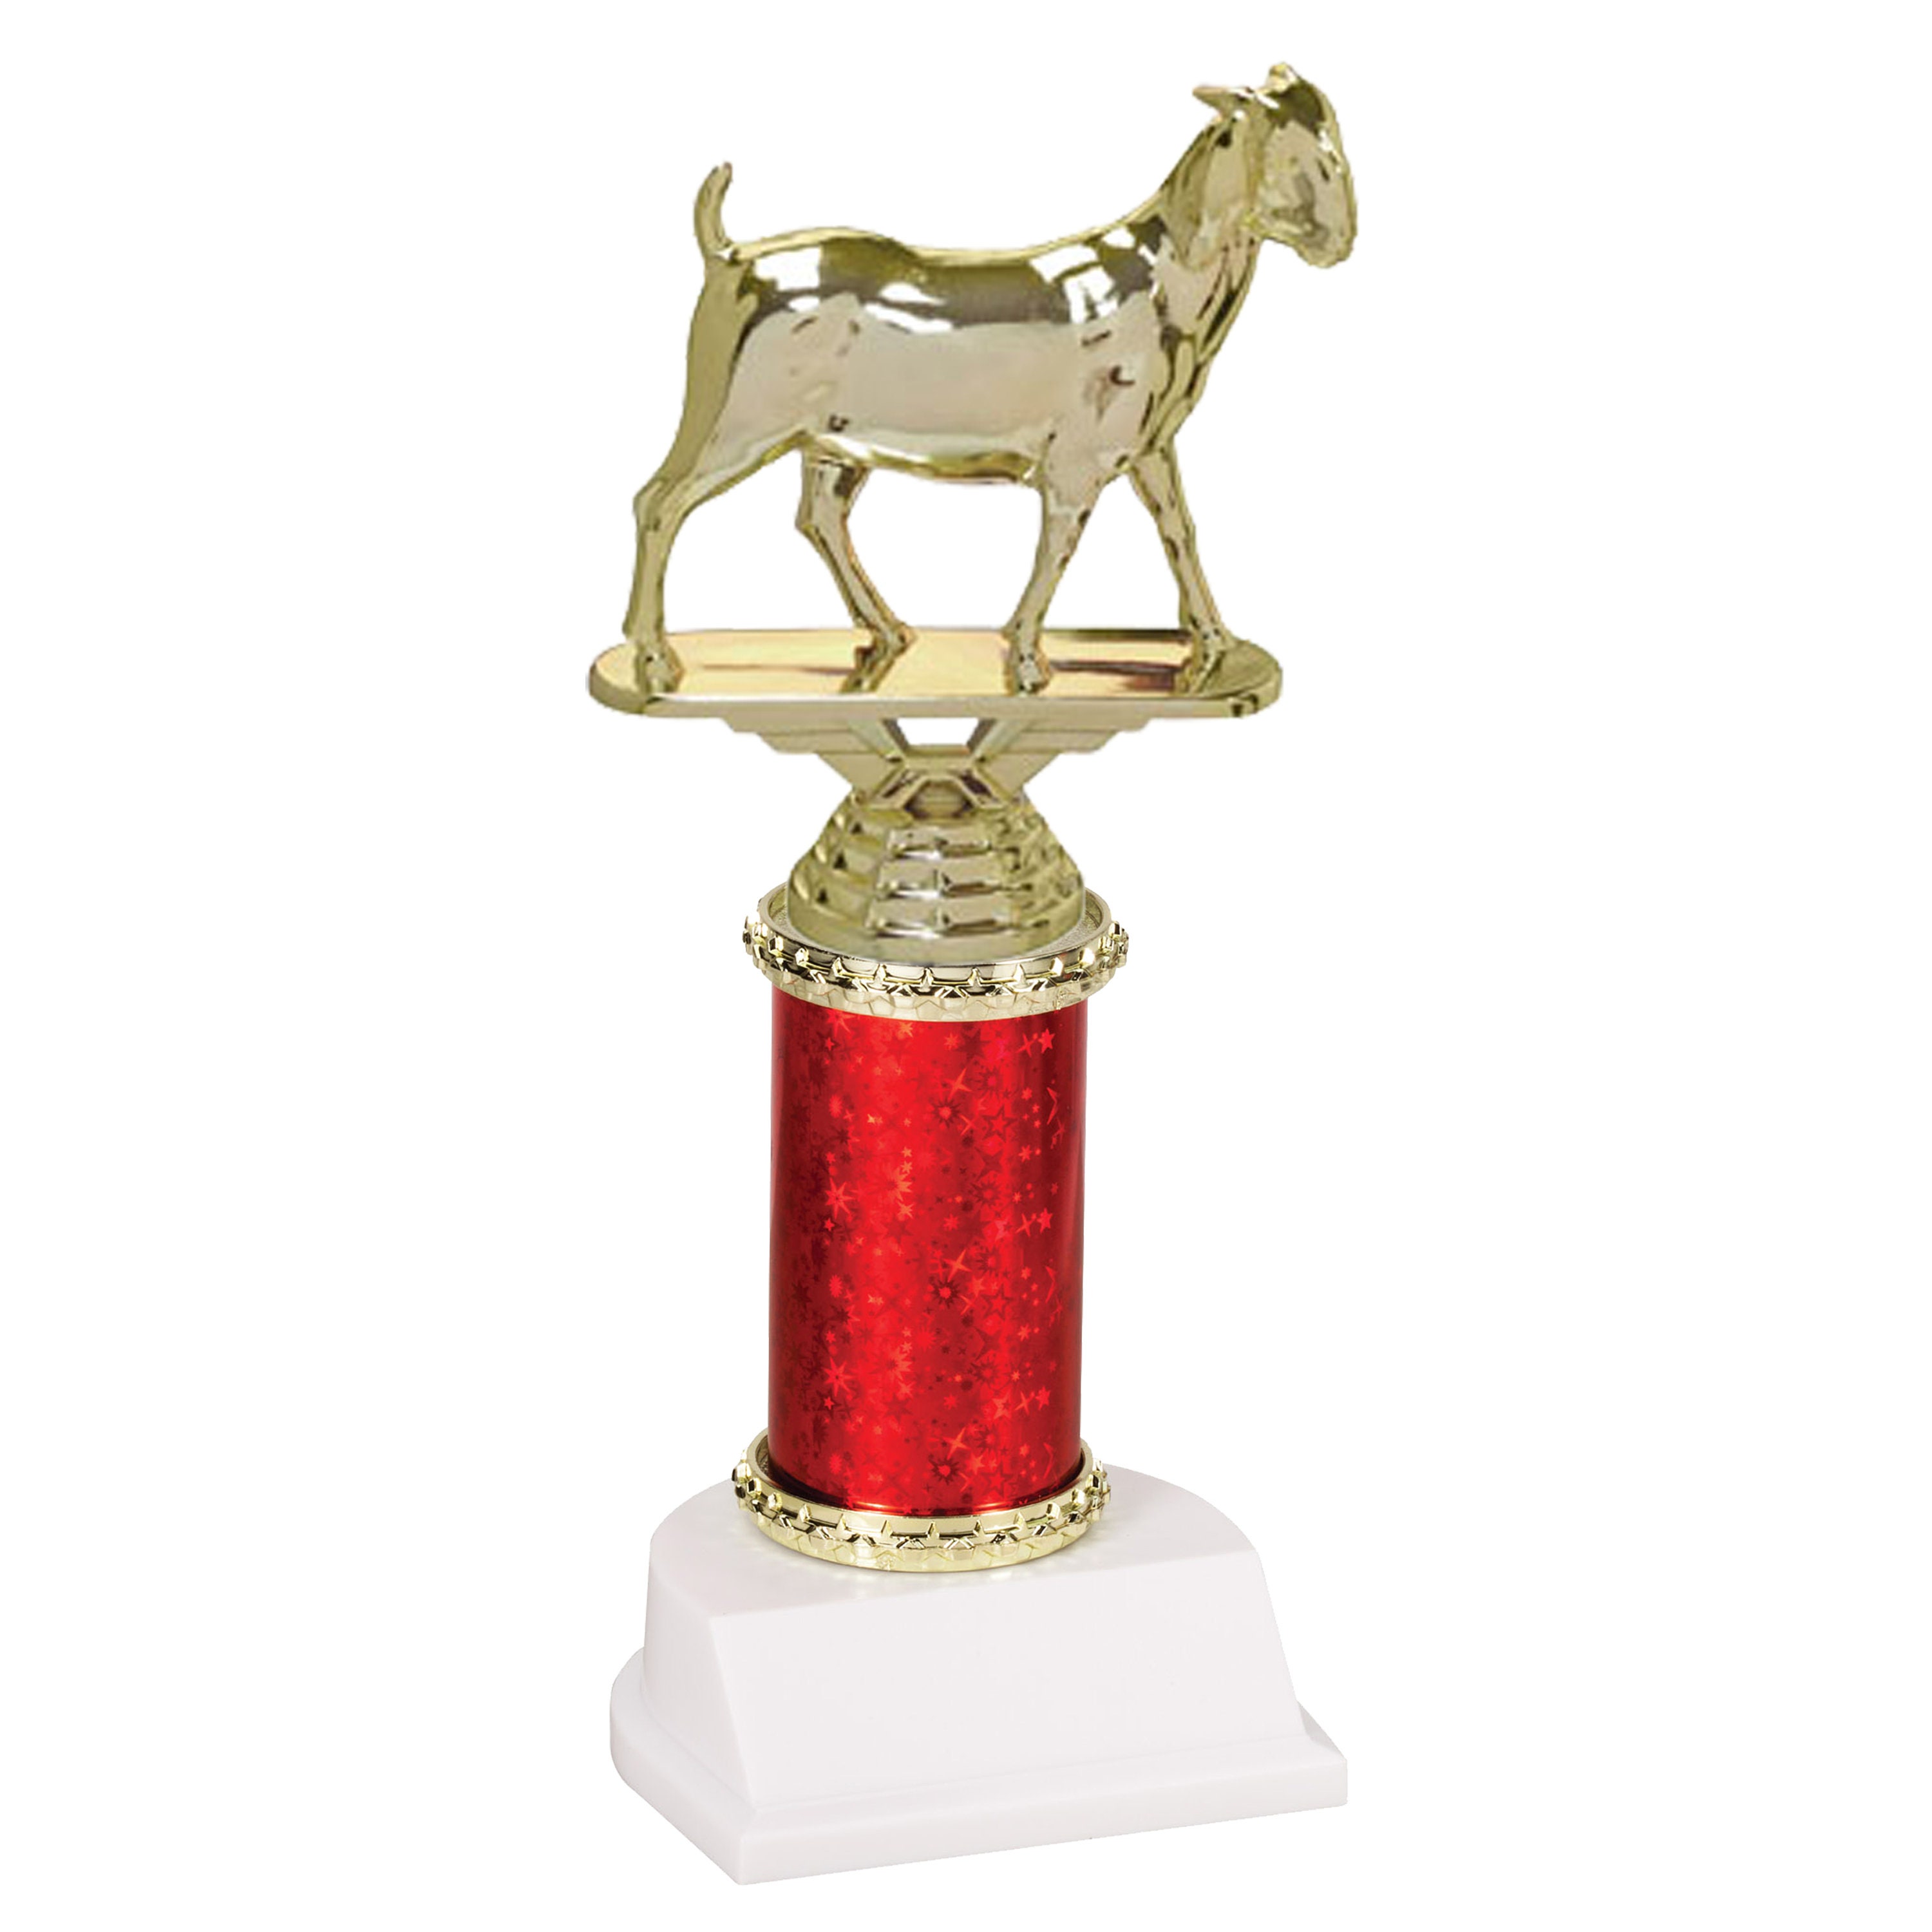 Greatest of All Time Trophy - GOAT - The Goat Trophy Award with Option for  Customized Engraving - Funny Trophy to Recognize Boss, Co-Workers, Friends